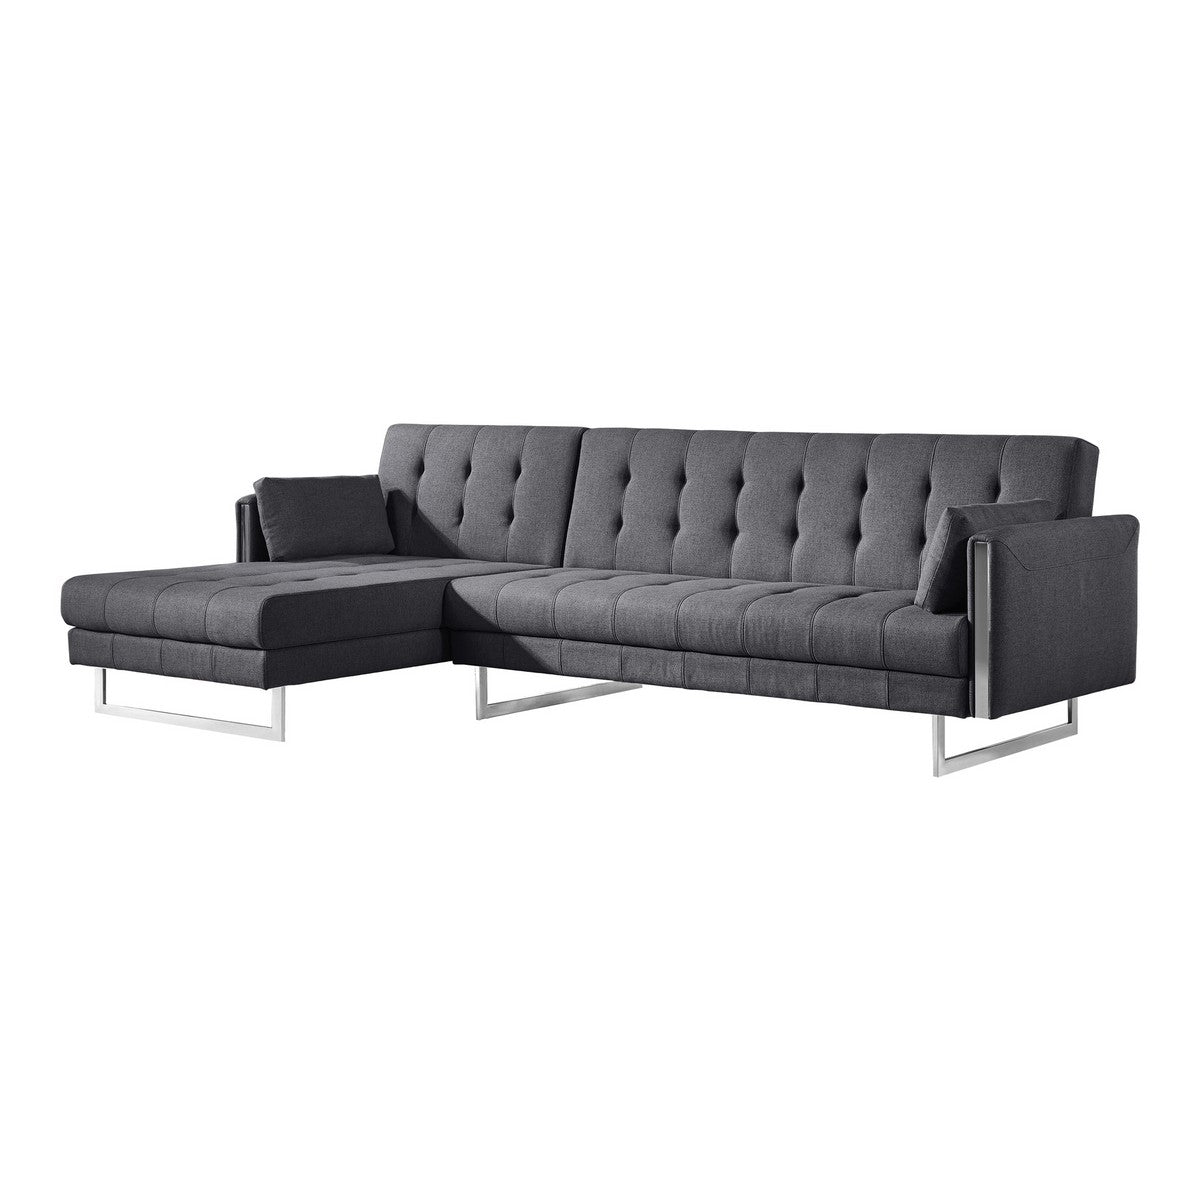 Moe's Home Collection Palomino Sofa Bed Left Dark Grey - MT-1003-15-L - Moe's Home Collection - Sofa Beds - Minimal And Modern - 1